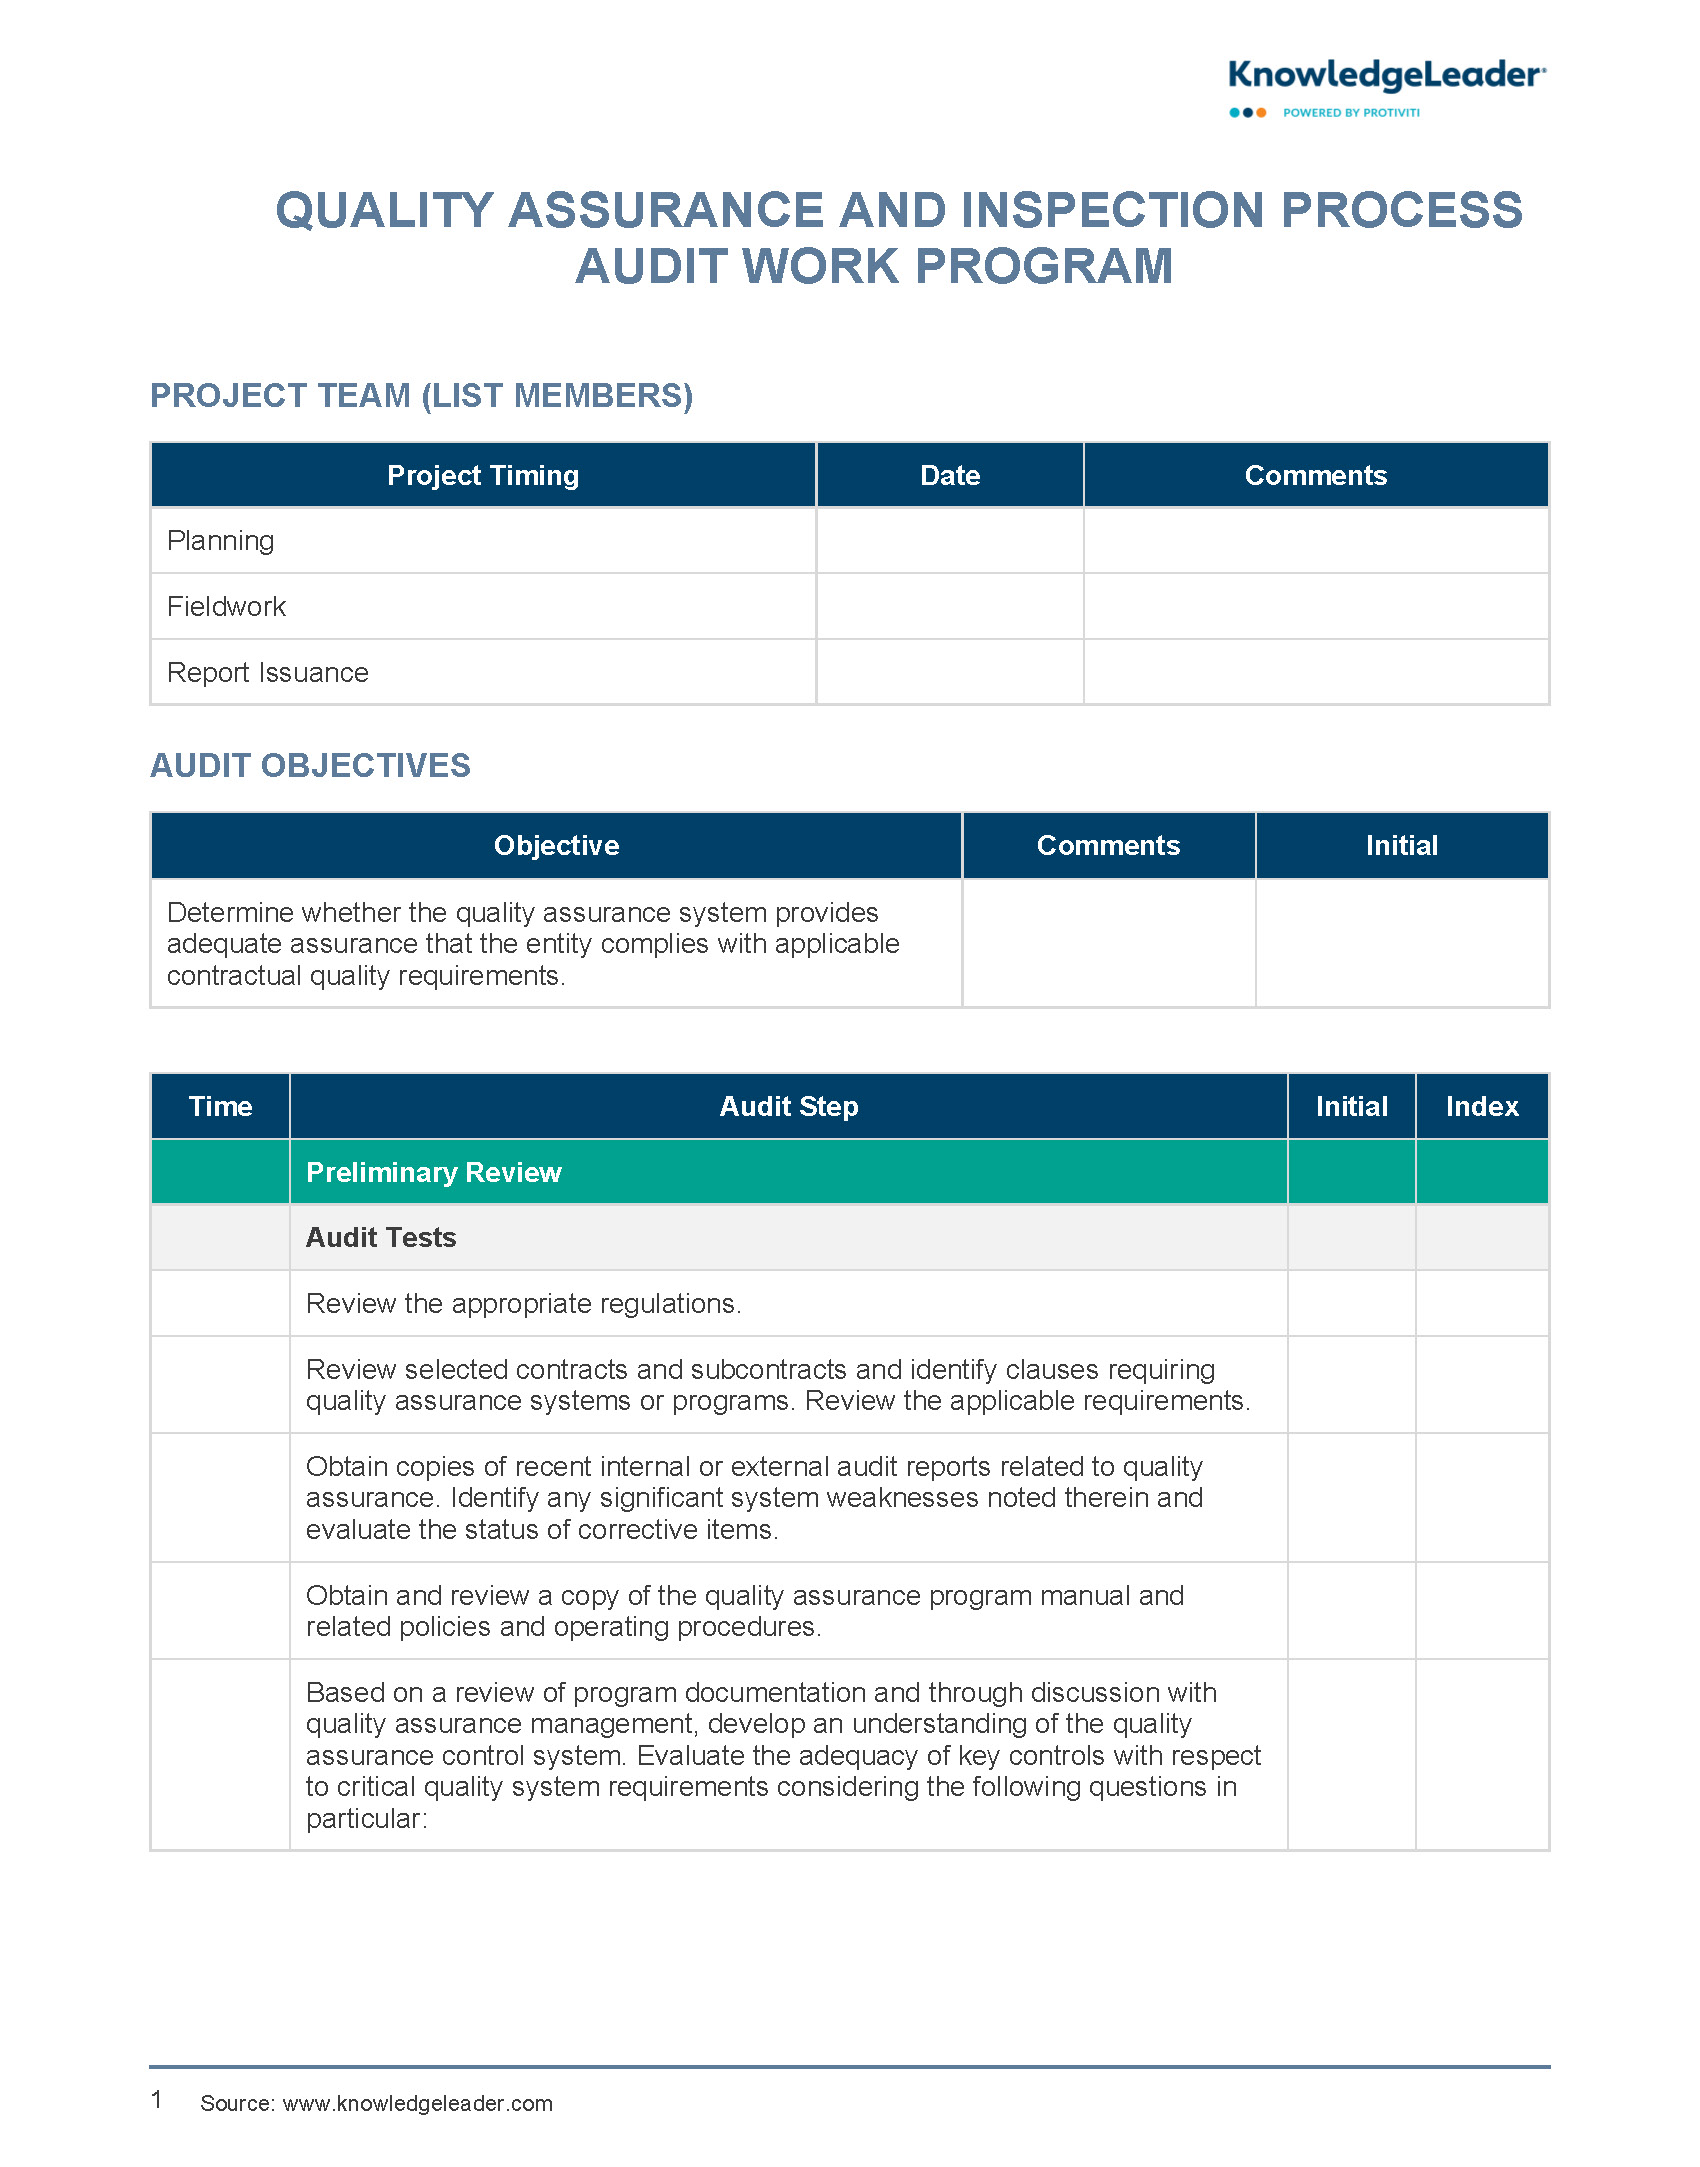 Quality Assurance and Inspection Process Audit Work Program